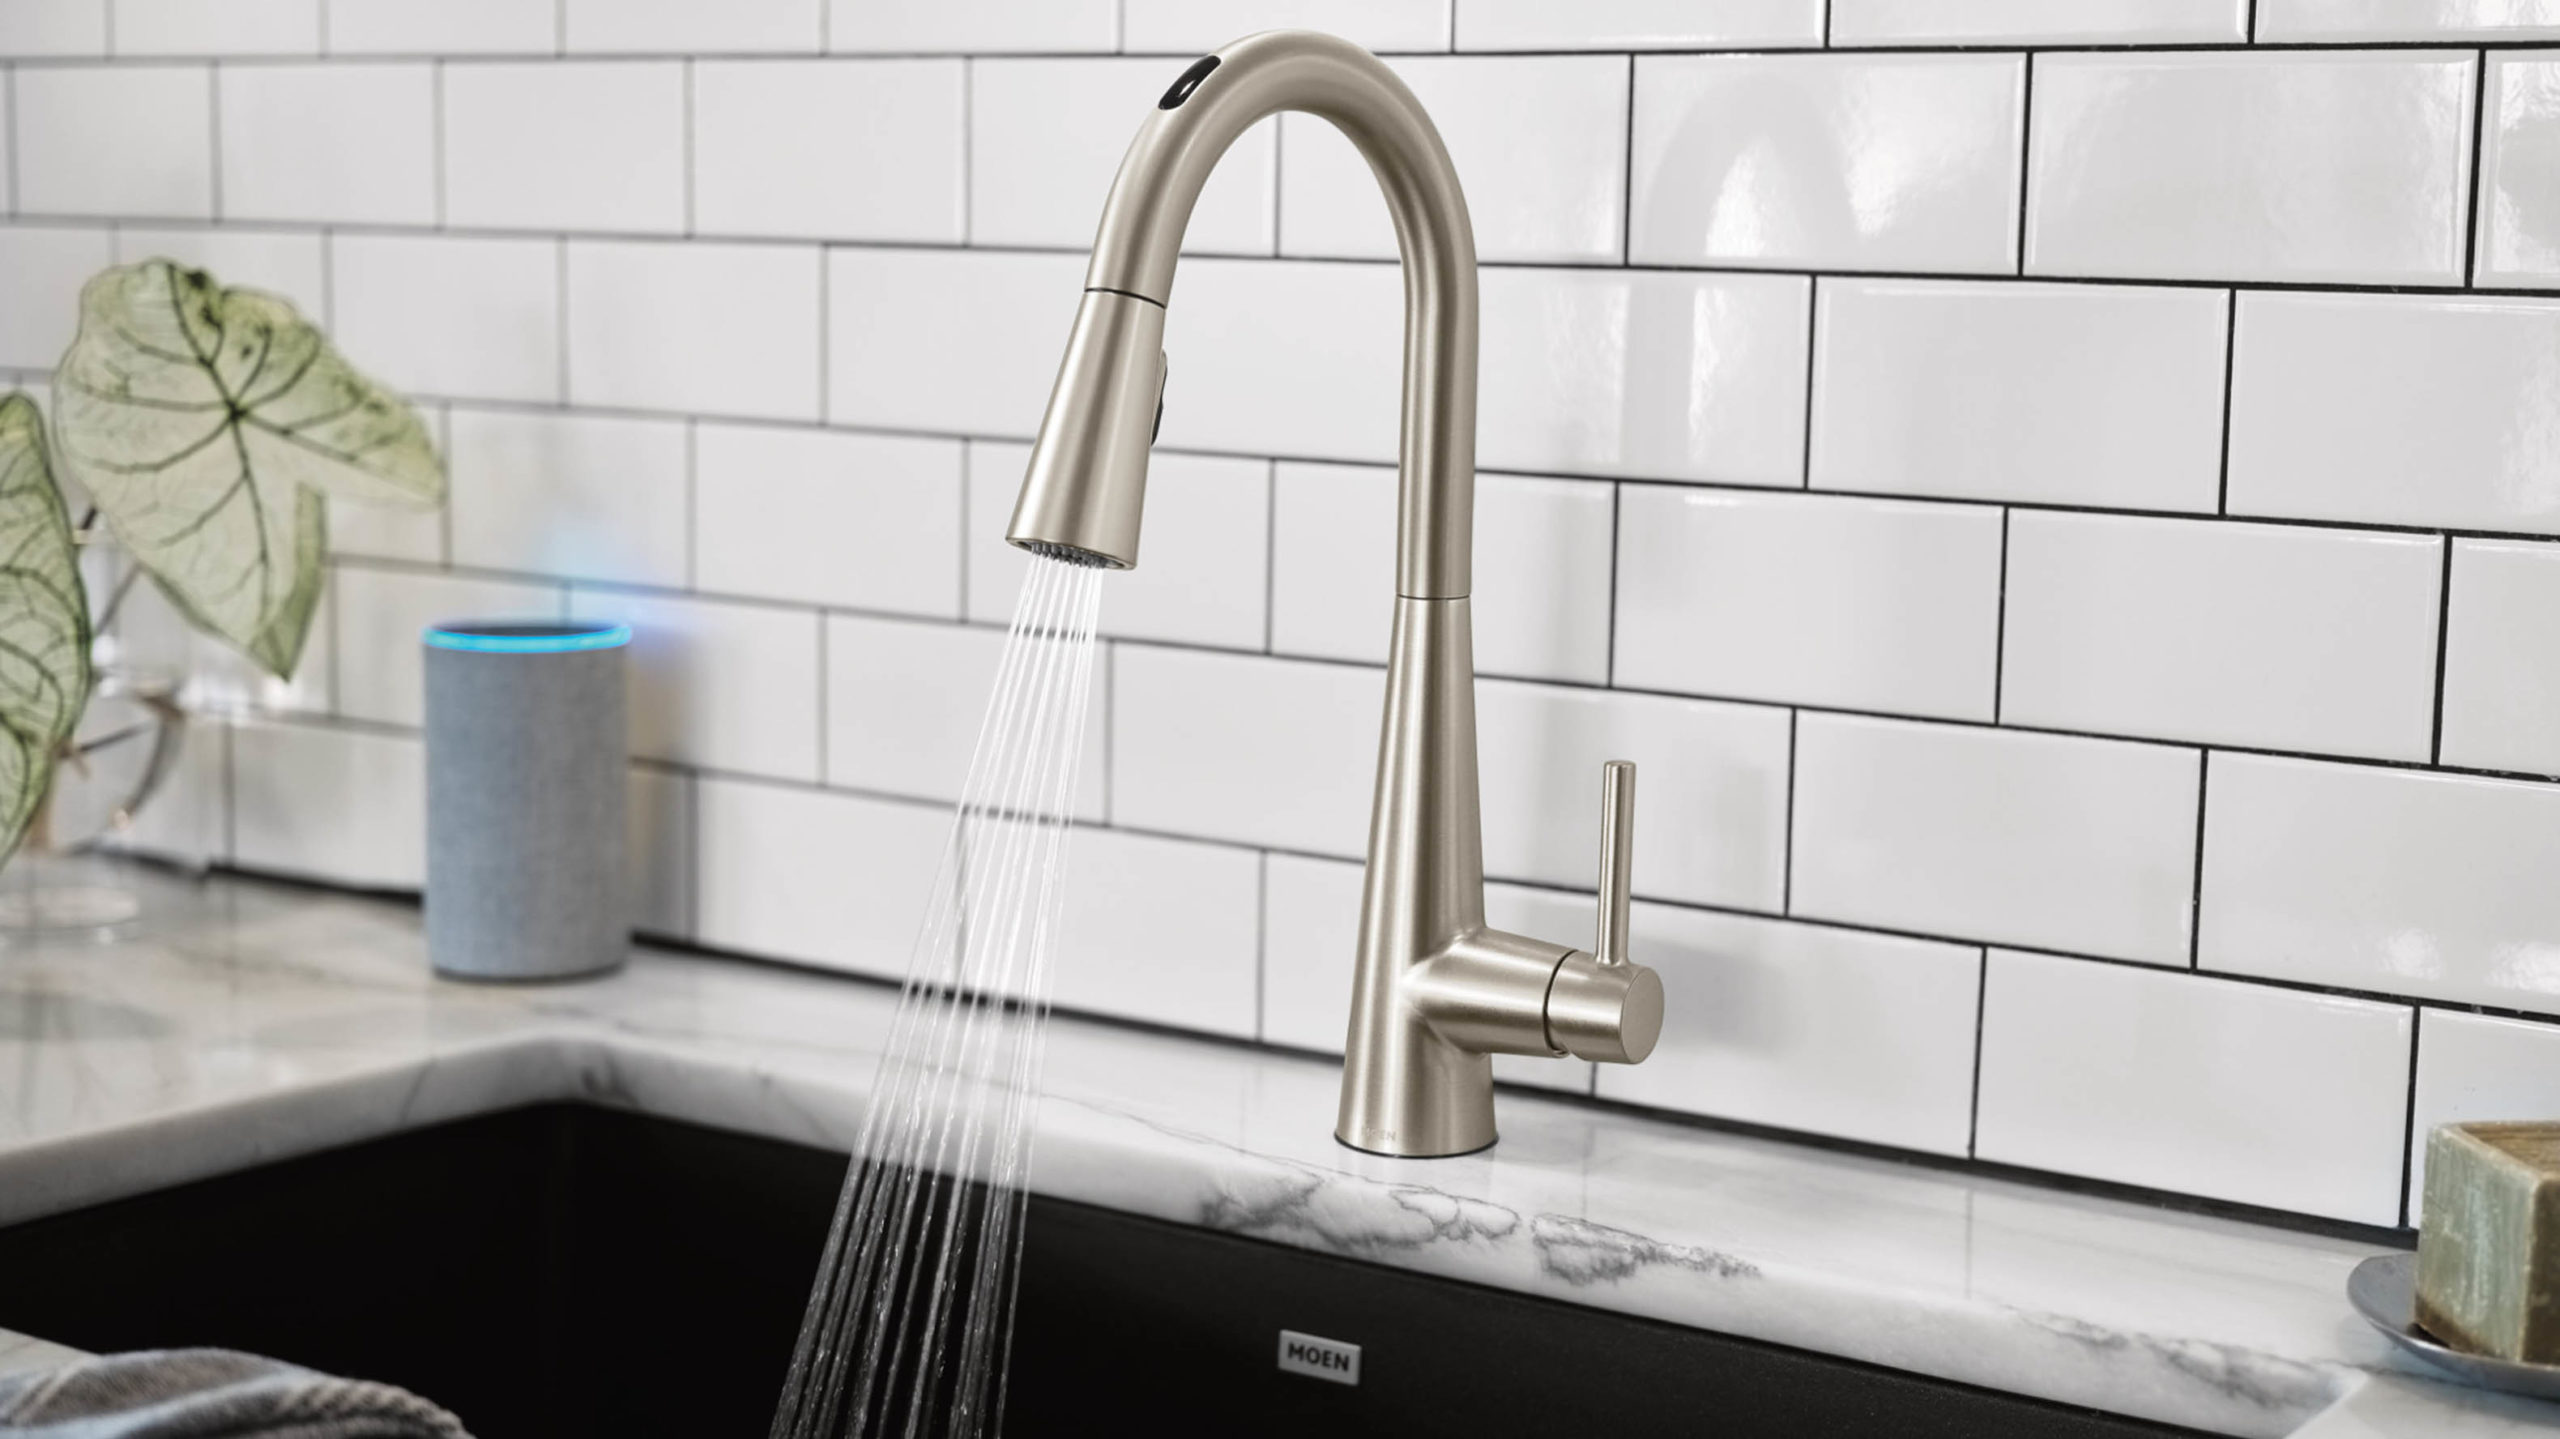 Moen's new smart faucet will give you exactly how much water you ask it for